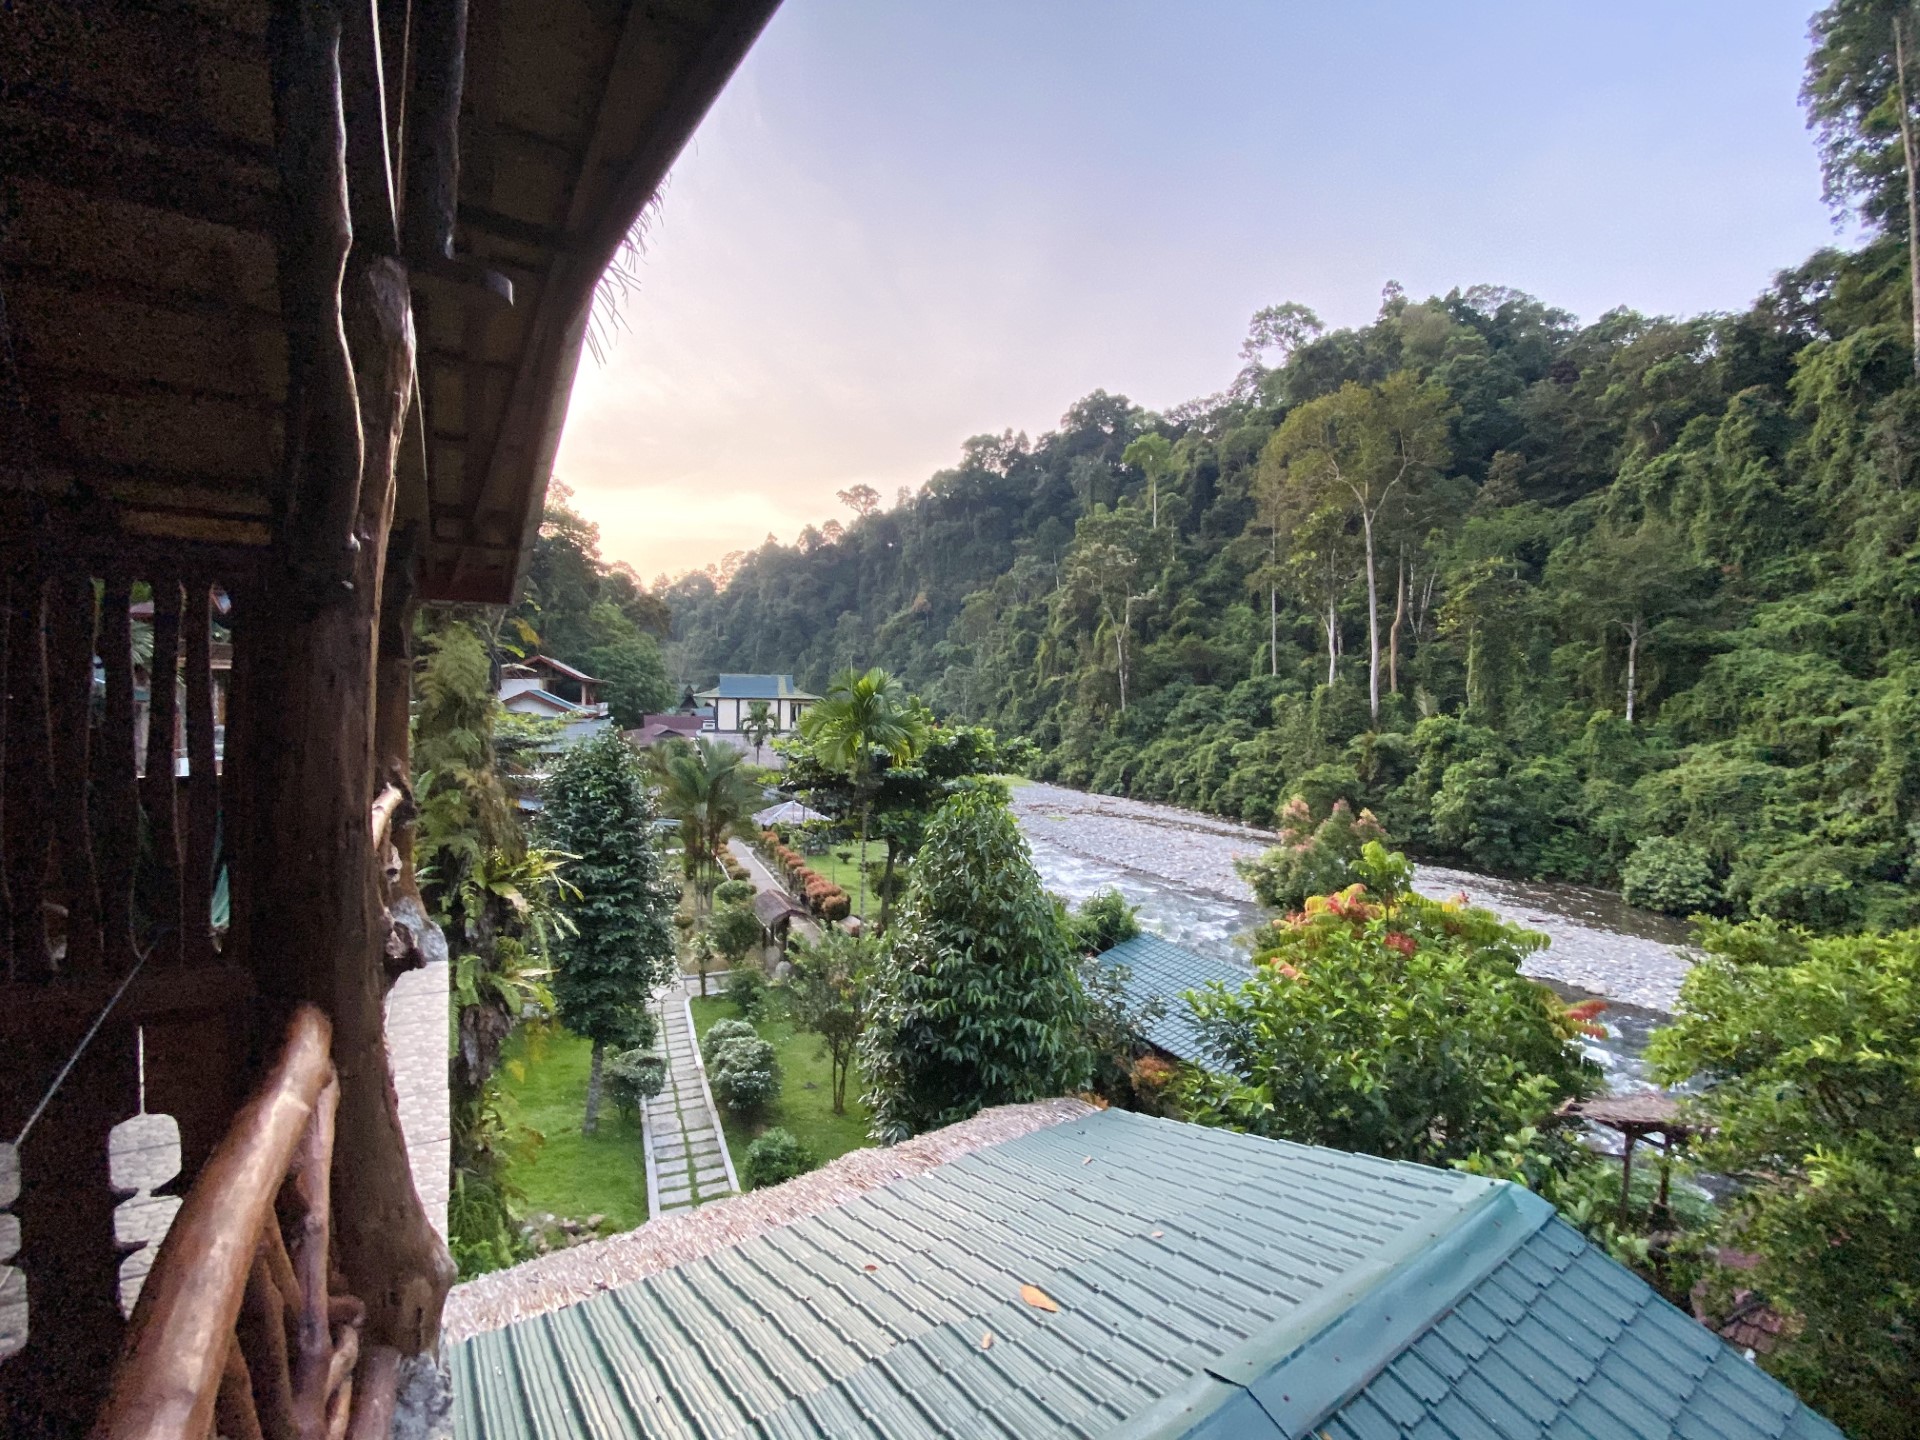 Morning views of the river and jungle edge from our balcony